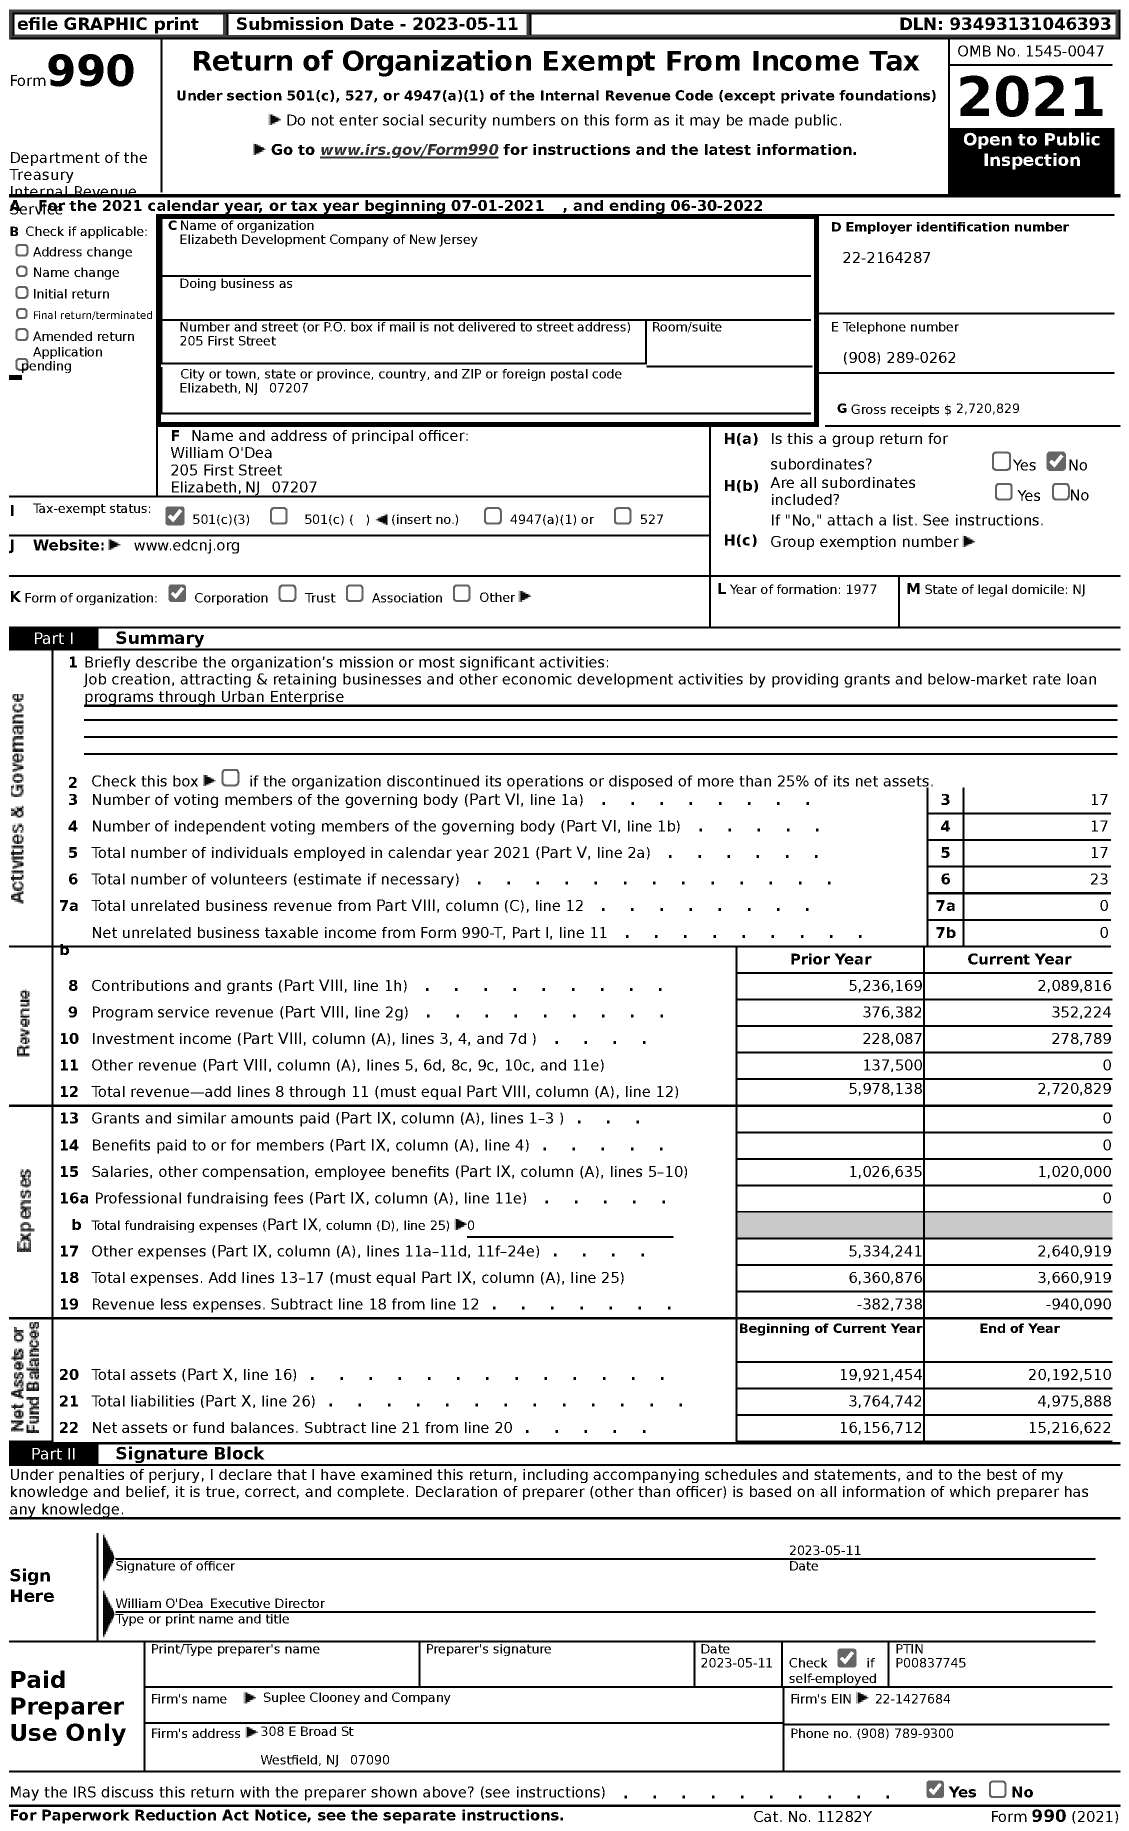 Image of first page of 2021 Form 990 for Elizabeth Development Company (EDC)